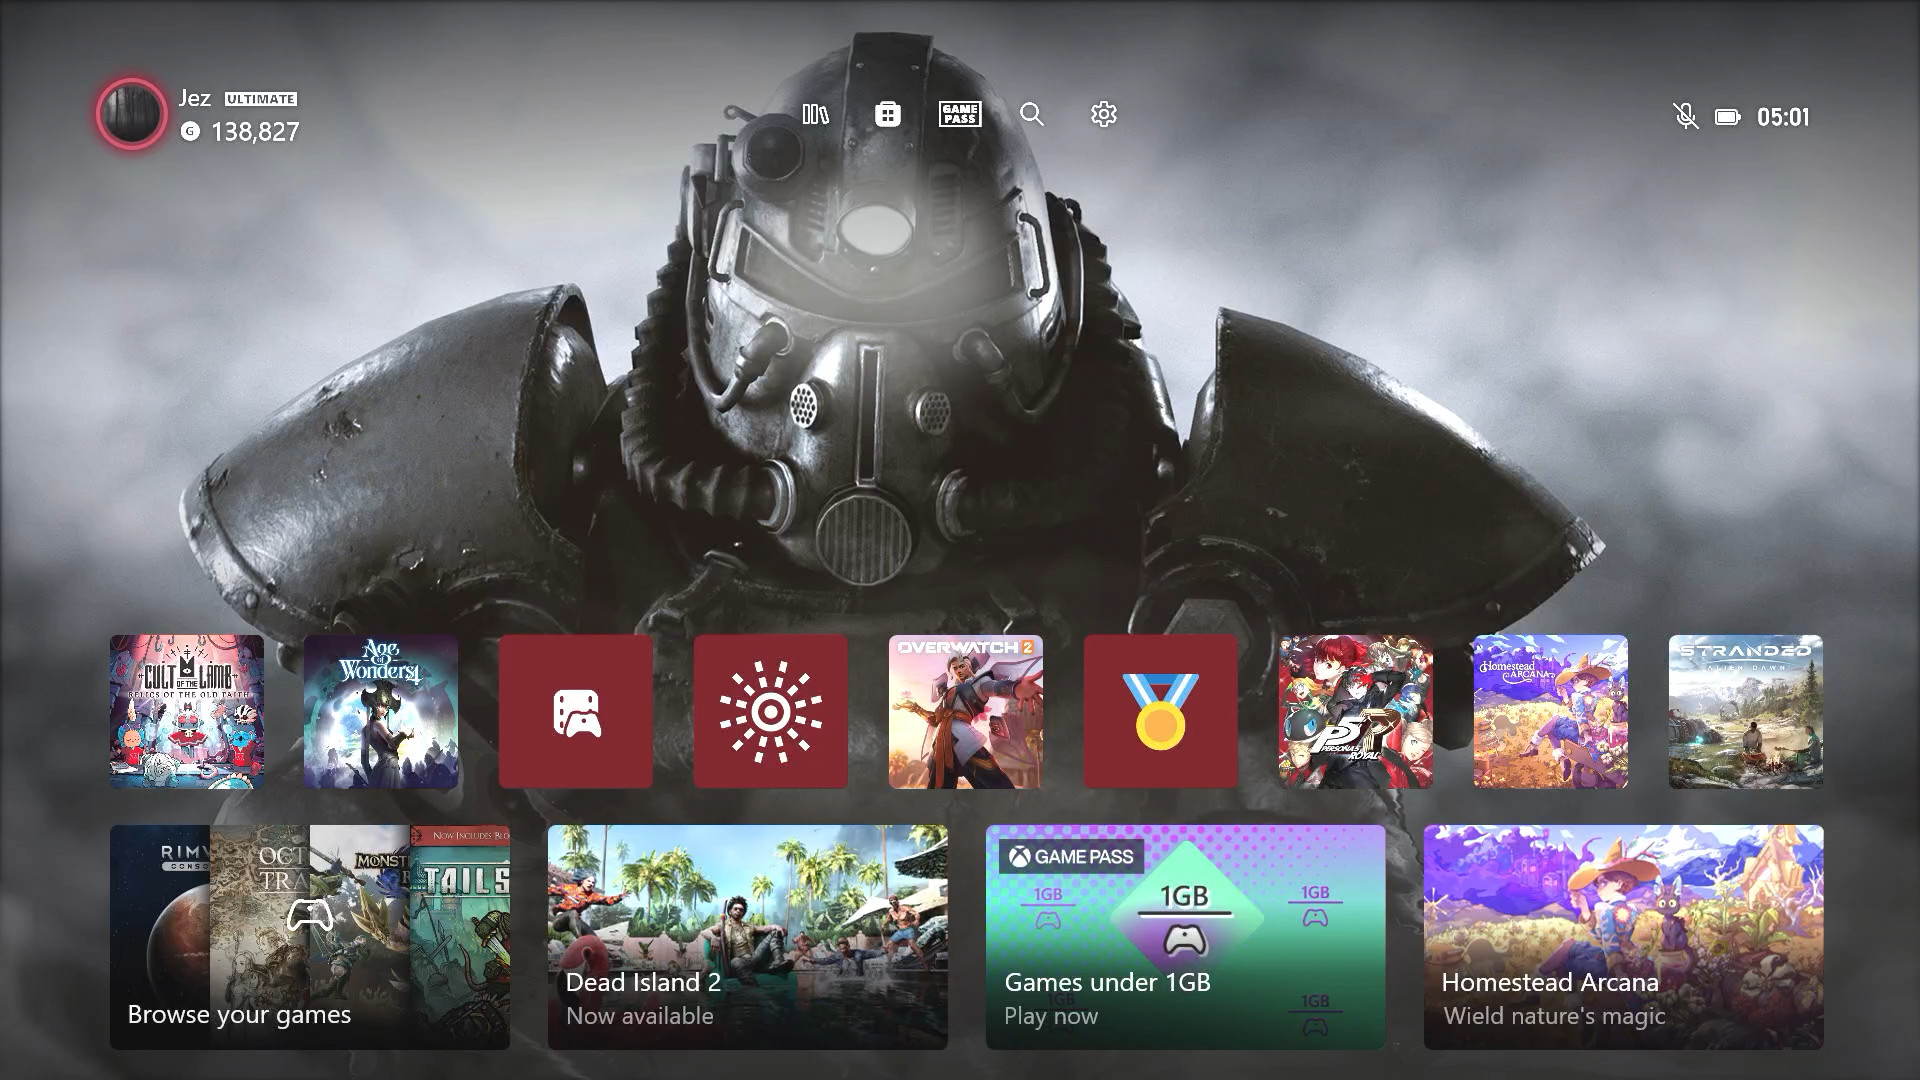 A cool new feature has been added to the Xbox consoles home page